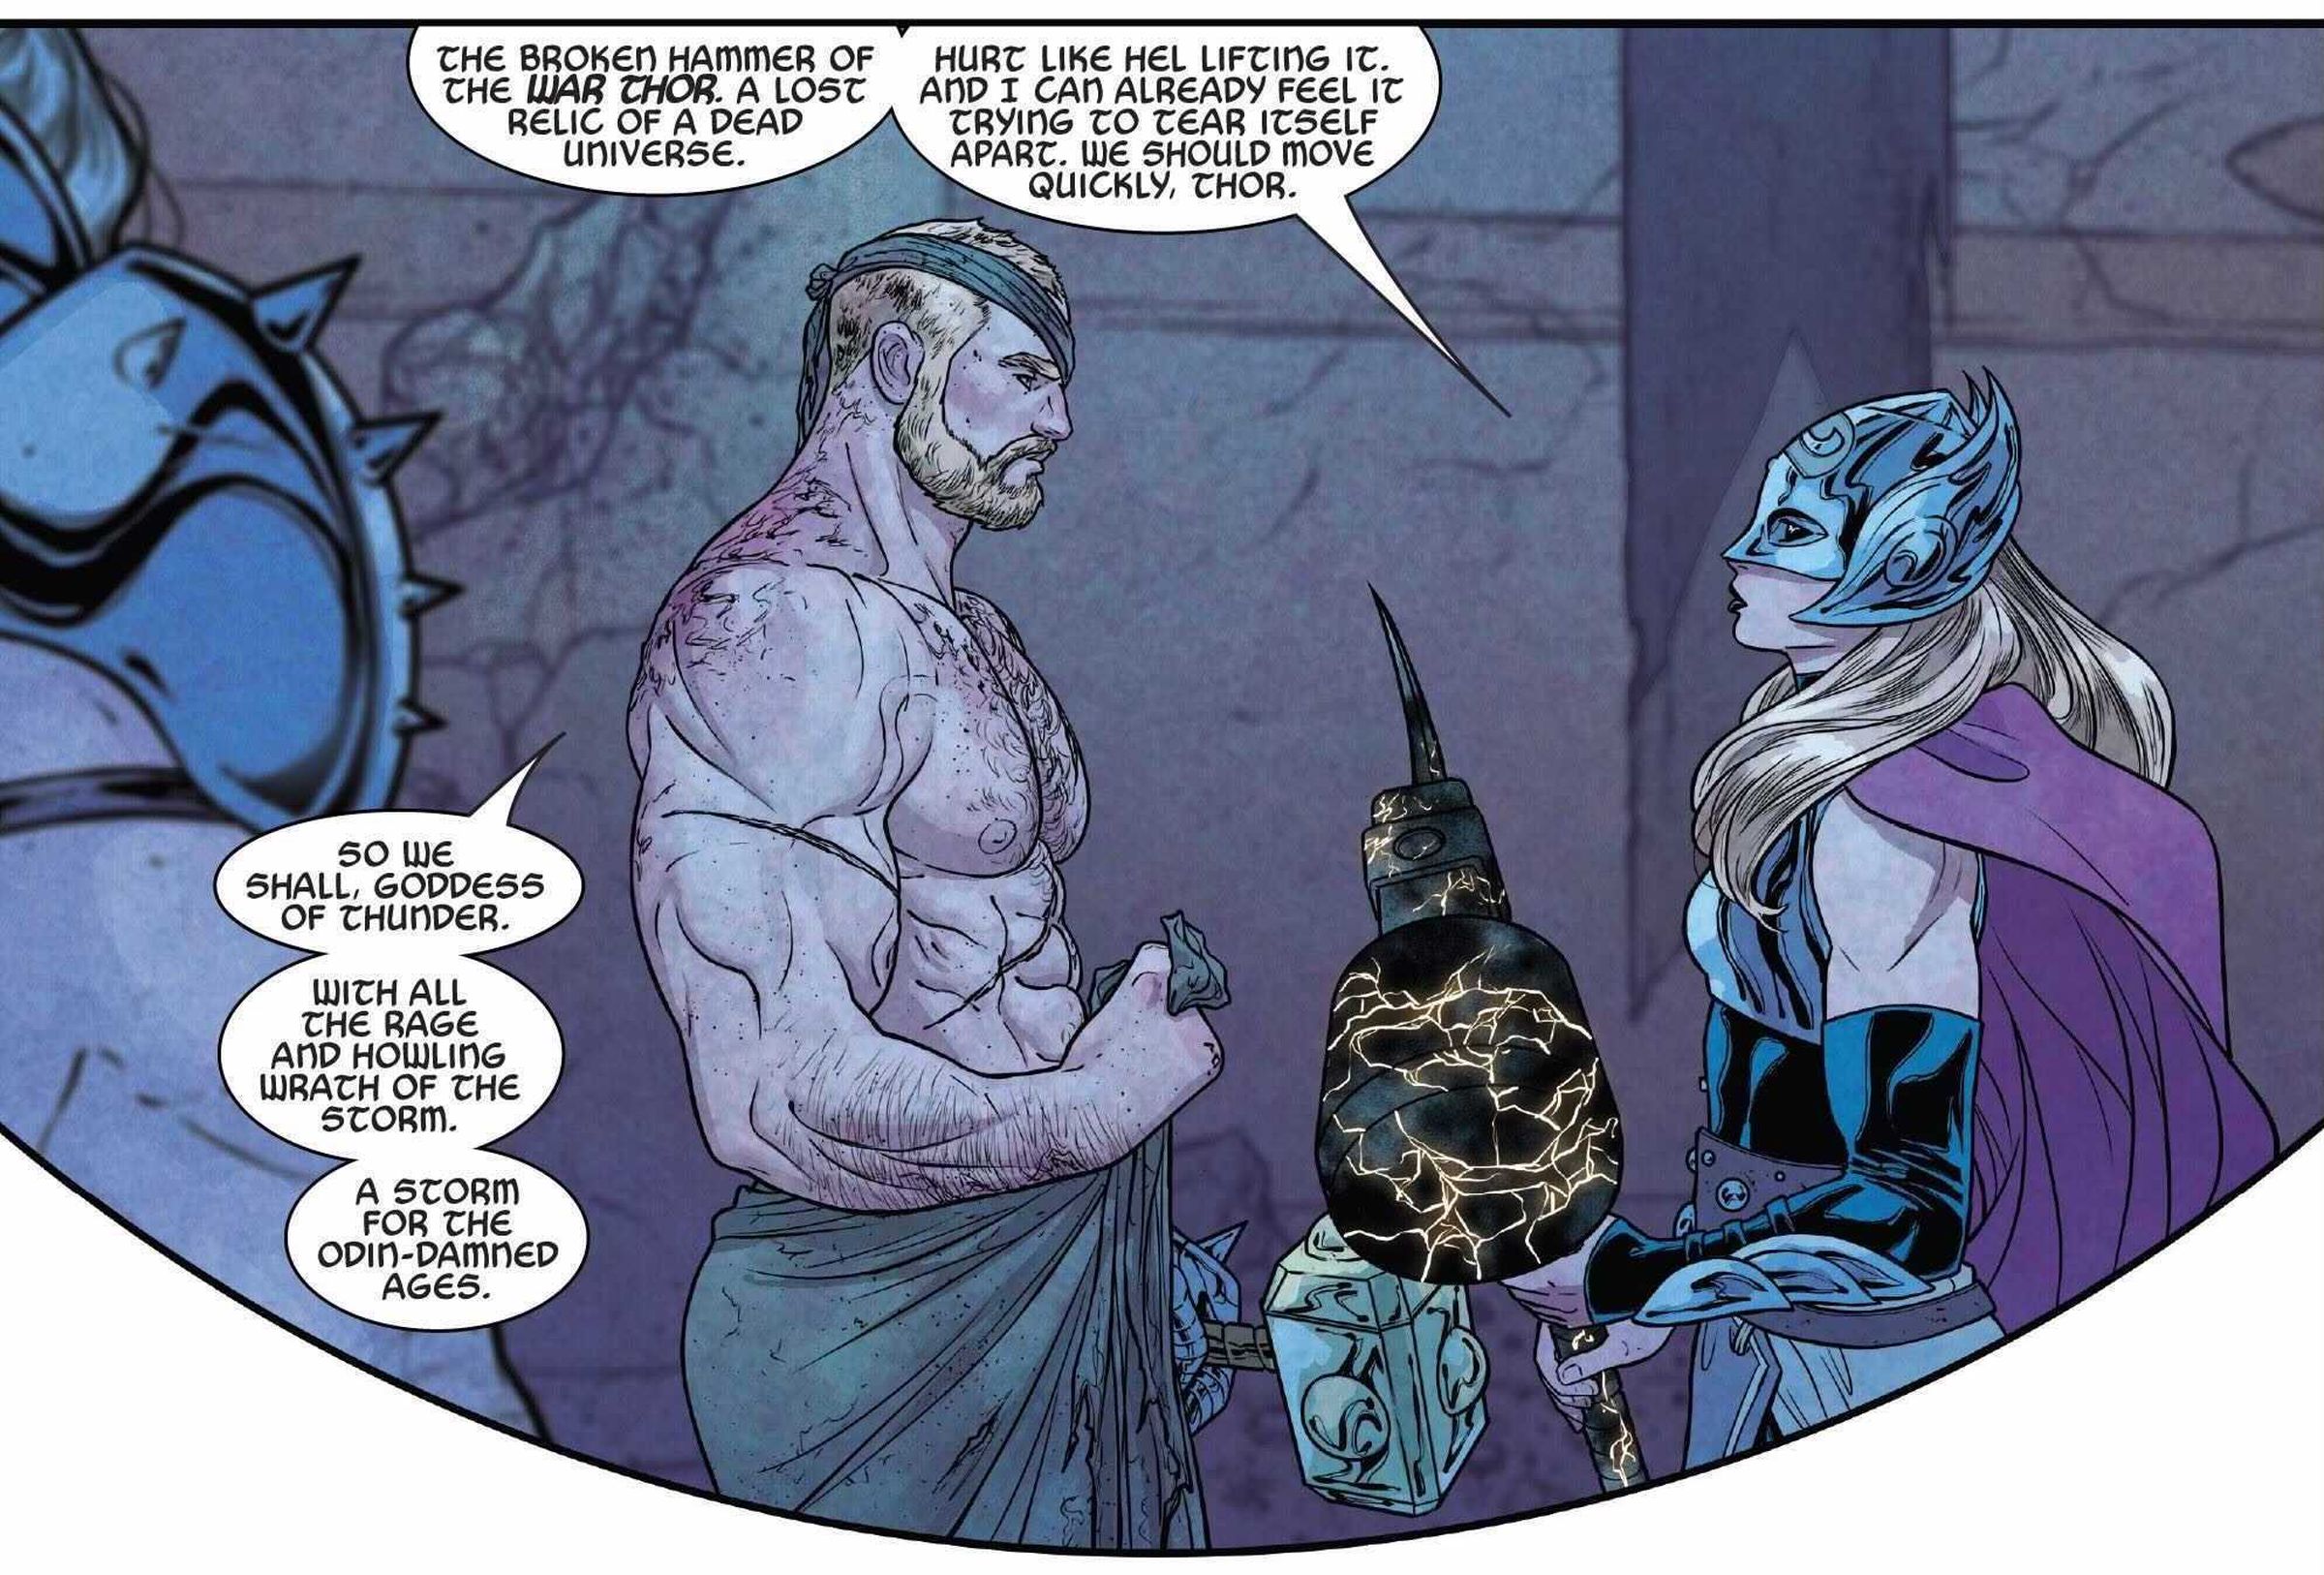 Odinson and Mighty Thor discussing War Thor’s hammer.